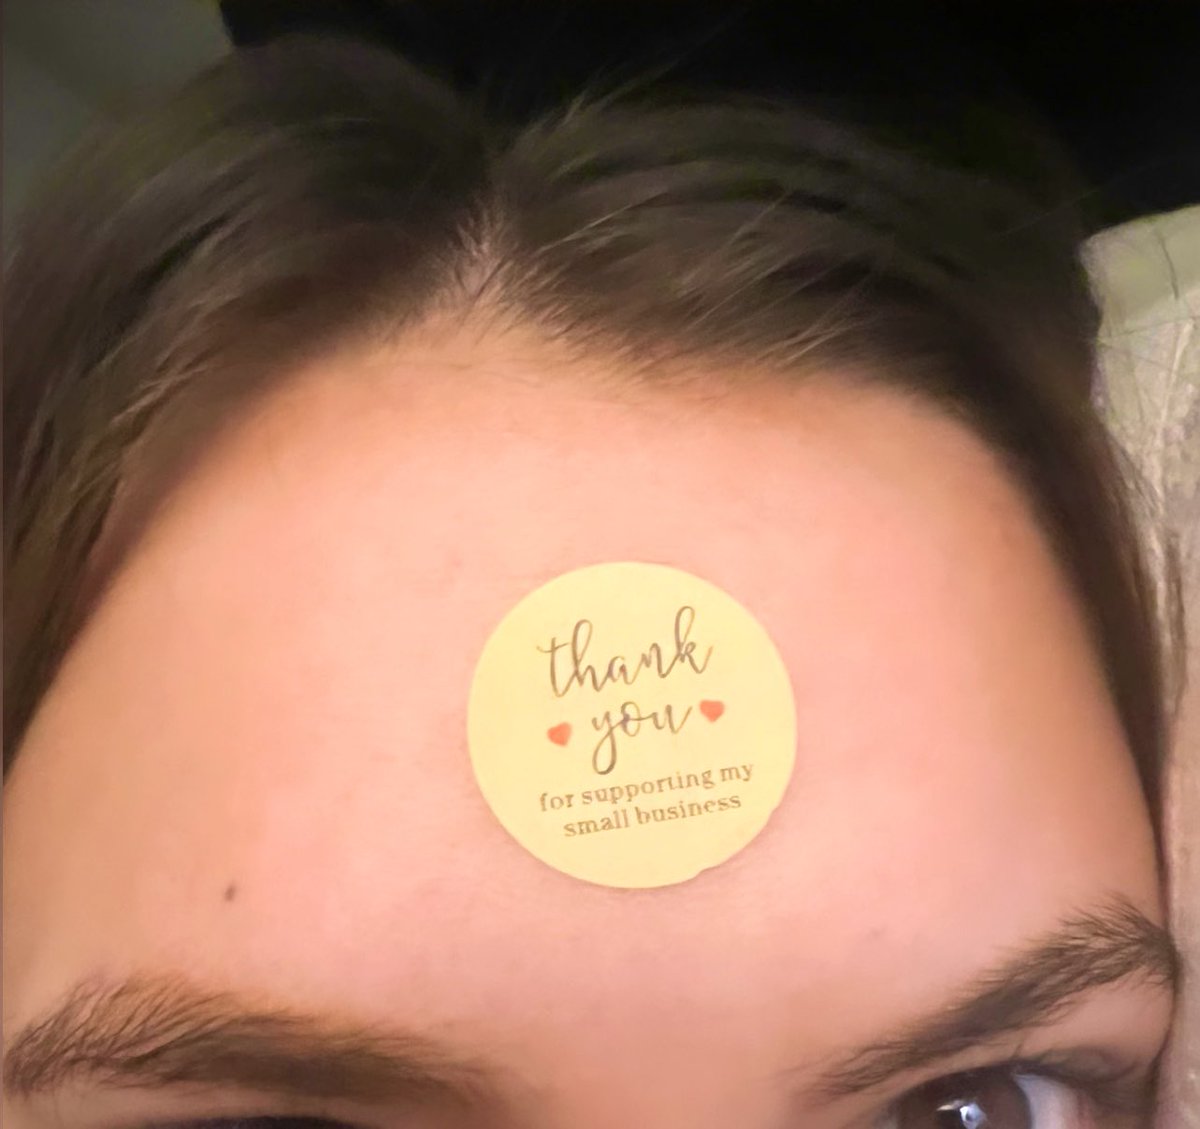 All of my clients are getting one of these on their head post appointment